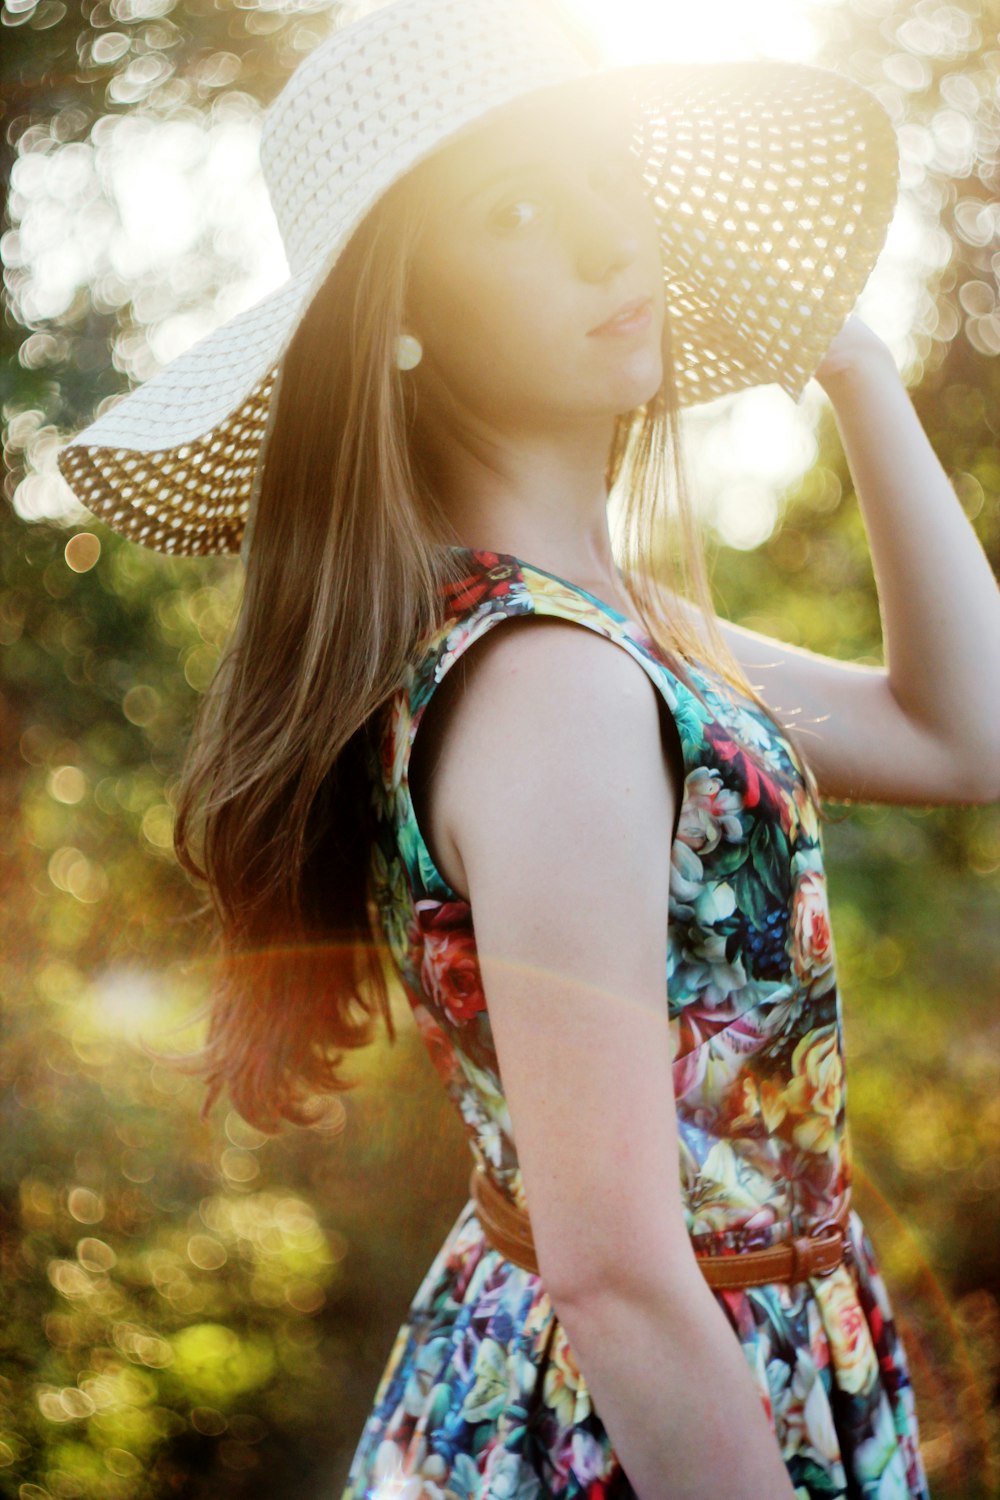 woman in white and blue floral tank top wearing white and black polka dot sun hat